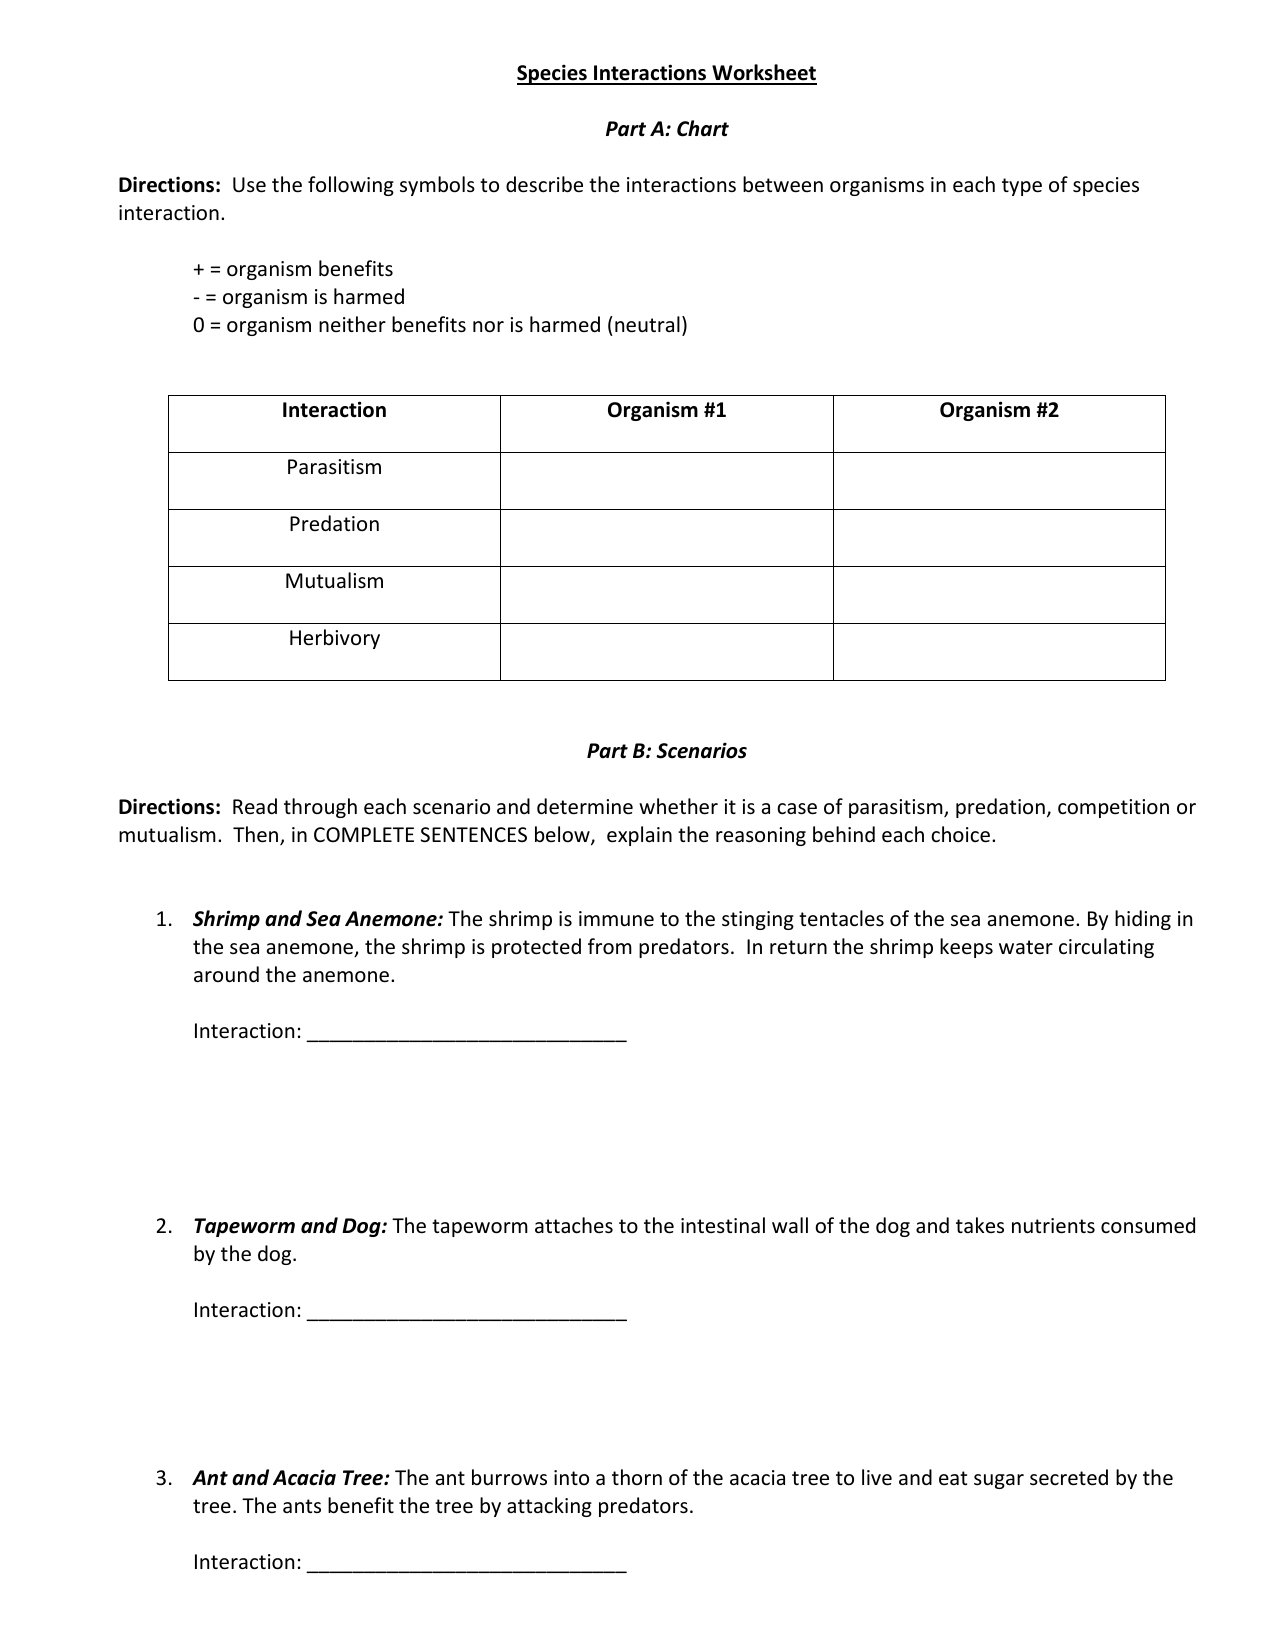 Species Interaction Worksheet Intended For Species Interactions Worksheet Answer Key